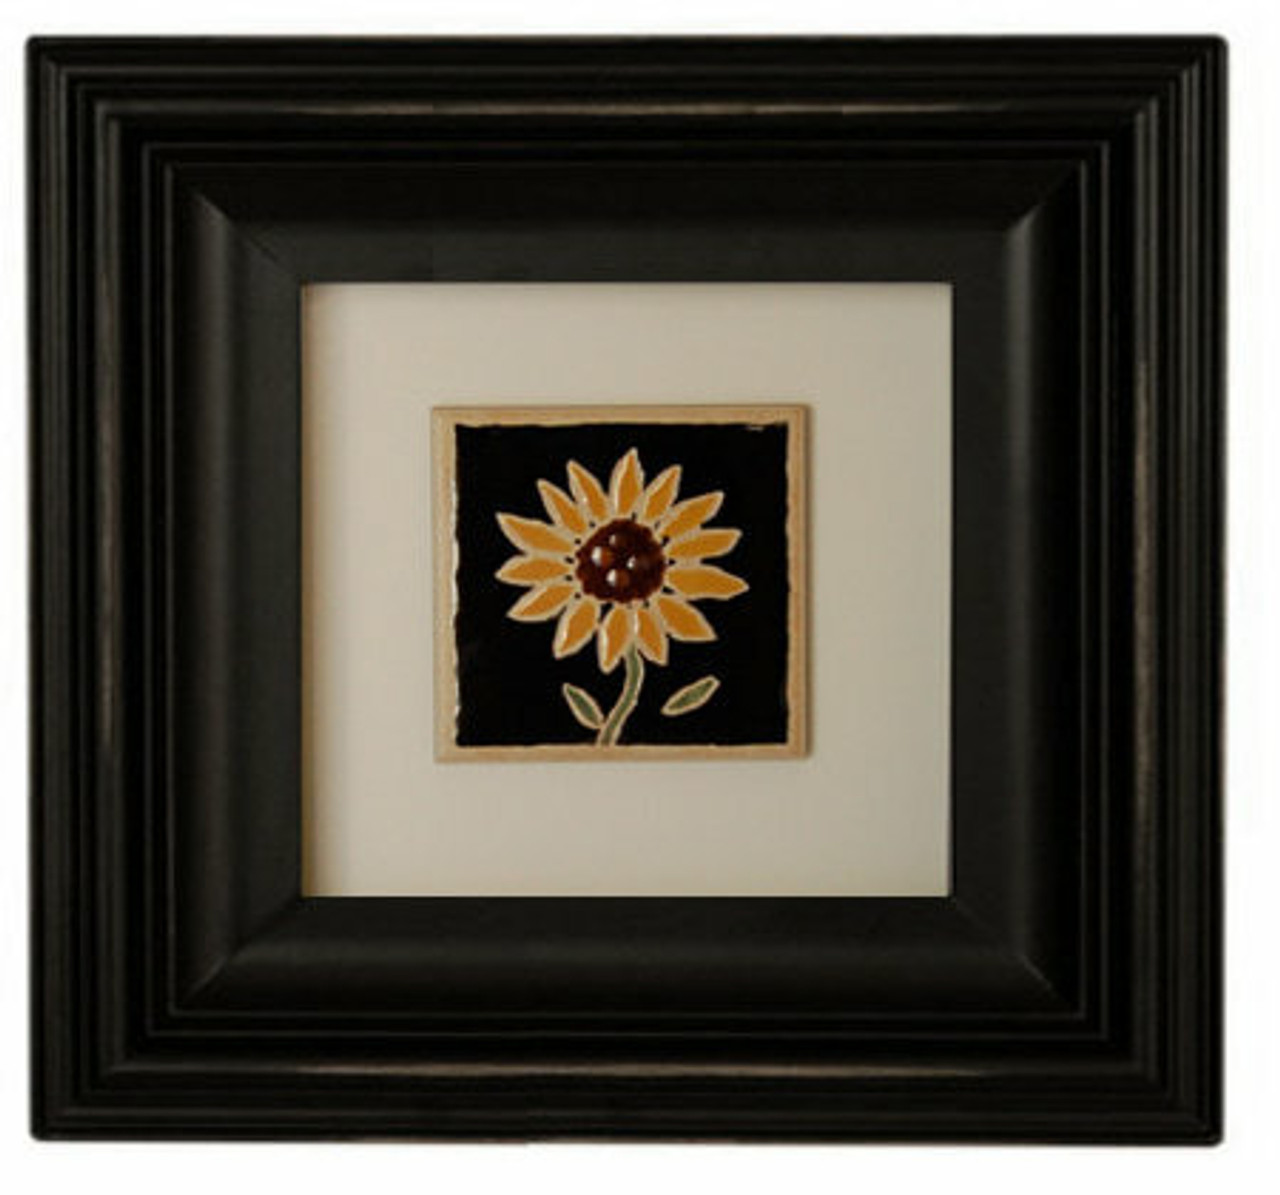 Square Black Picture Frame, 8x8 Wood Frame with Scoop Molding